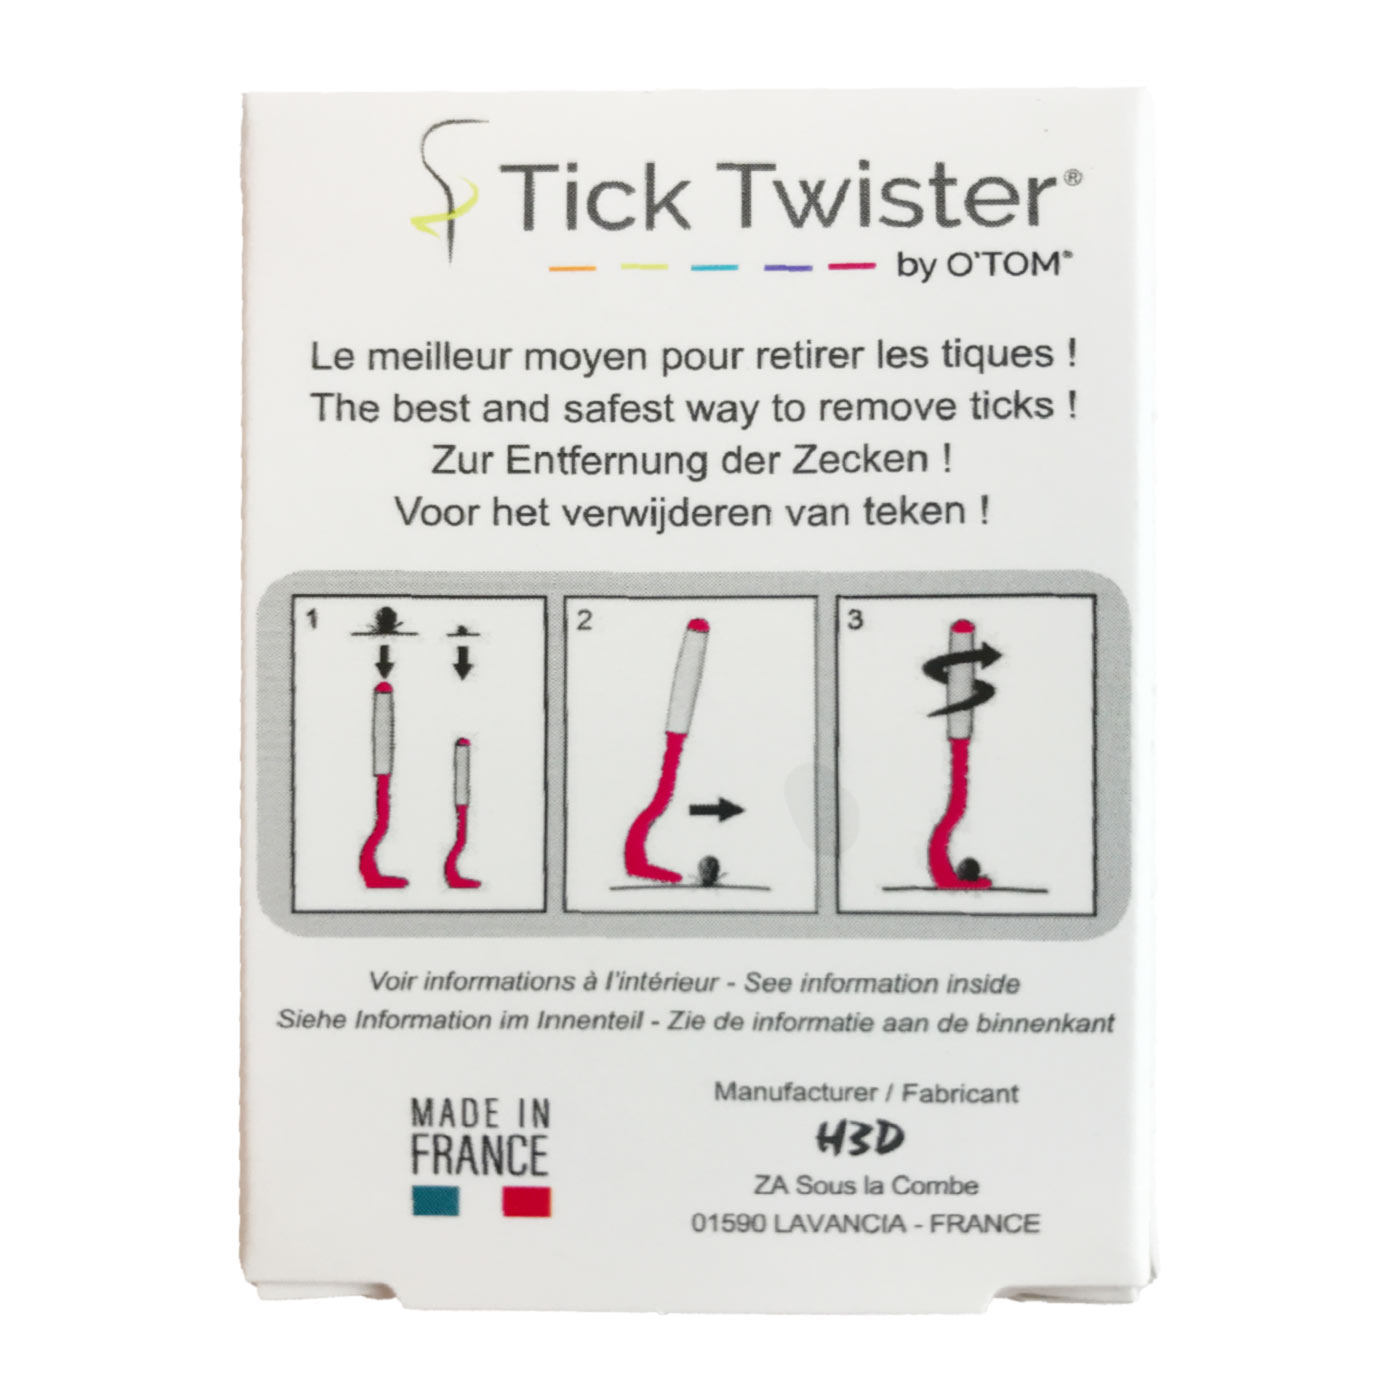 Tick Twister is the best and safest way to remove ticks. Package back view.